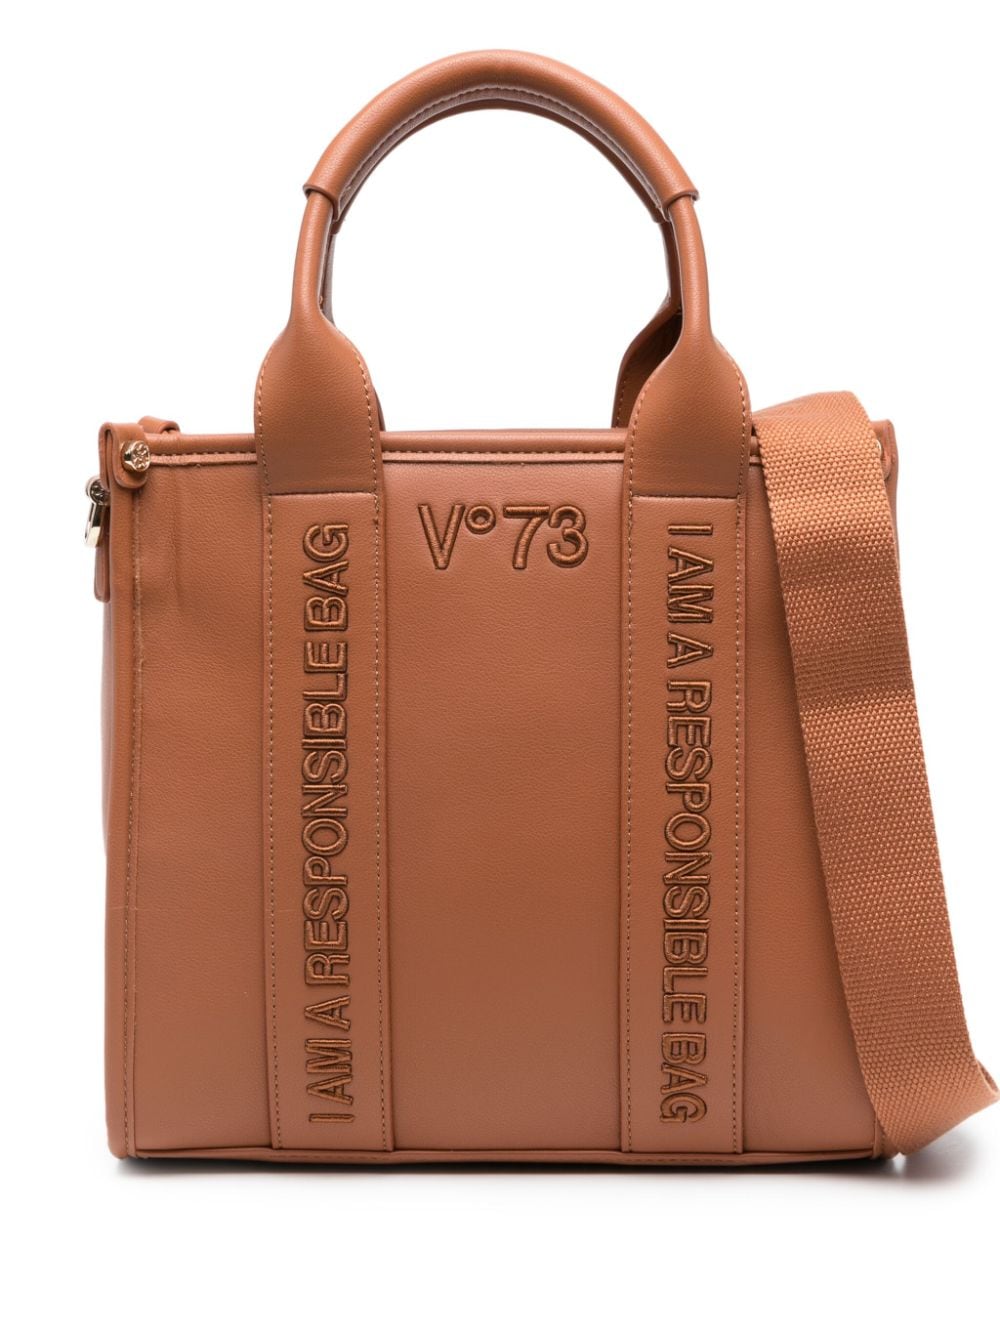 Shop V73 Small Shopping Echo 73 Tote Bag In Brown